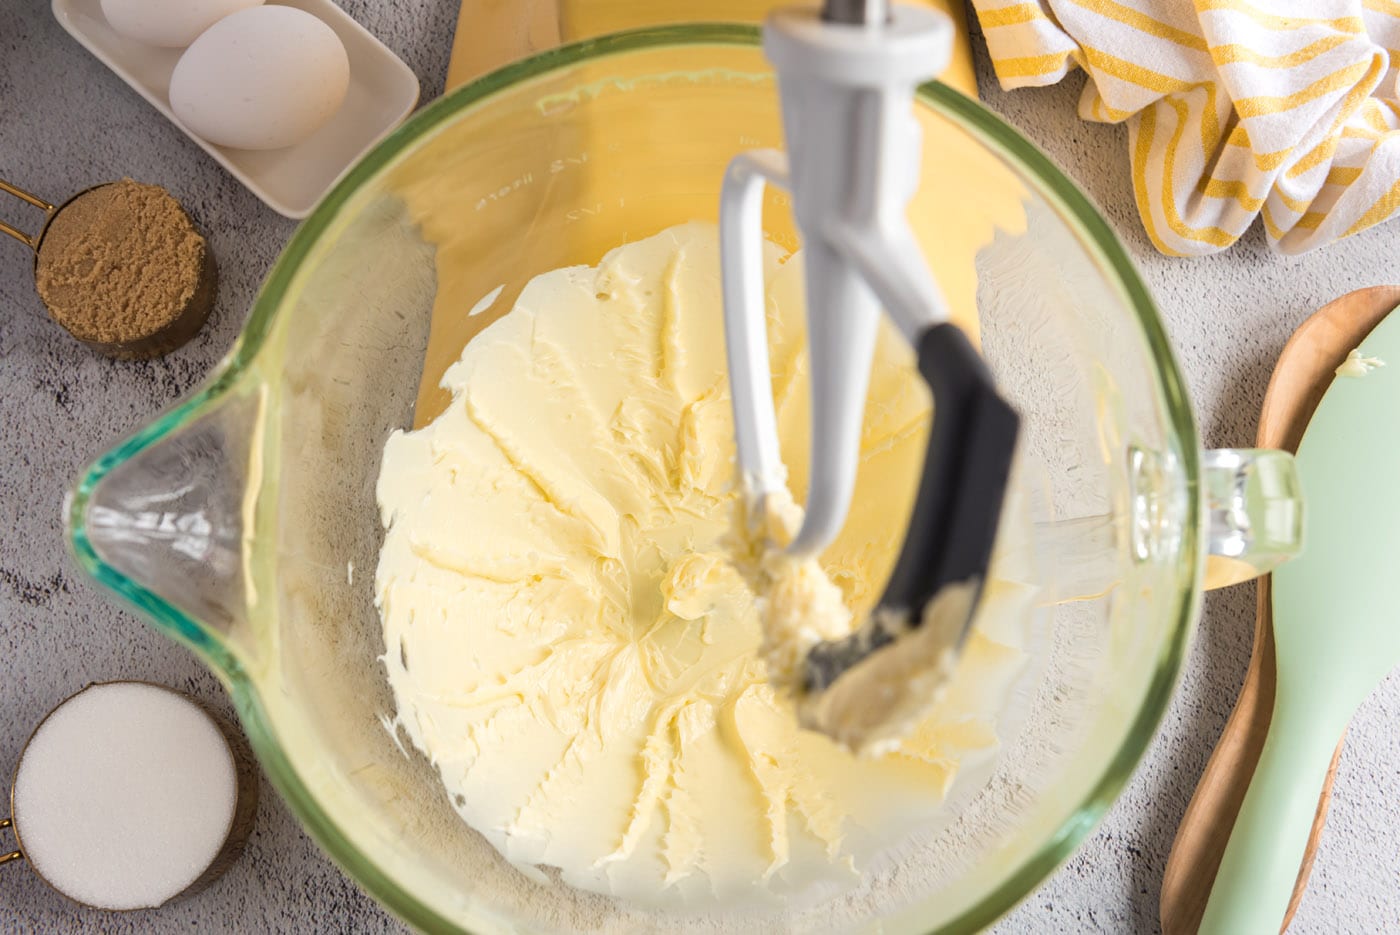 beating butter with a paddle attachment